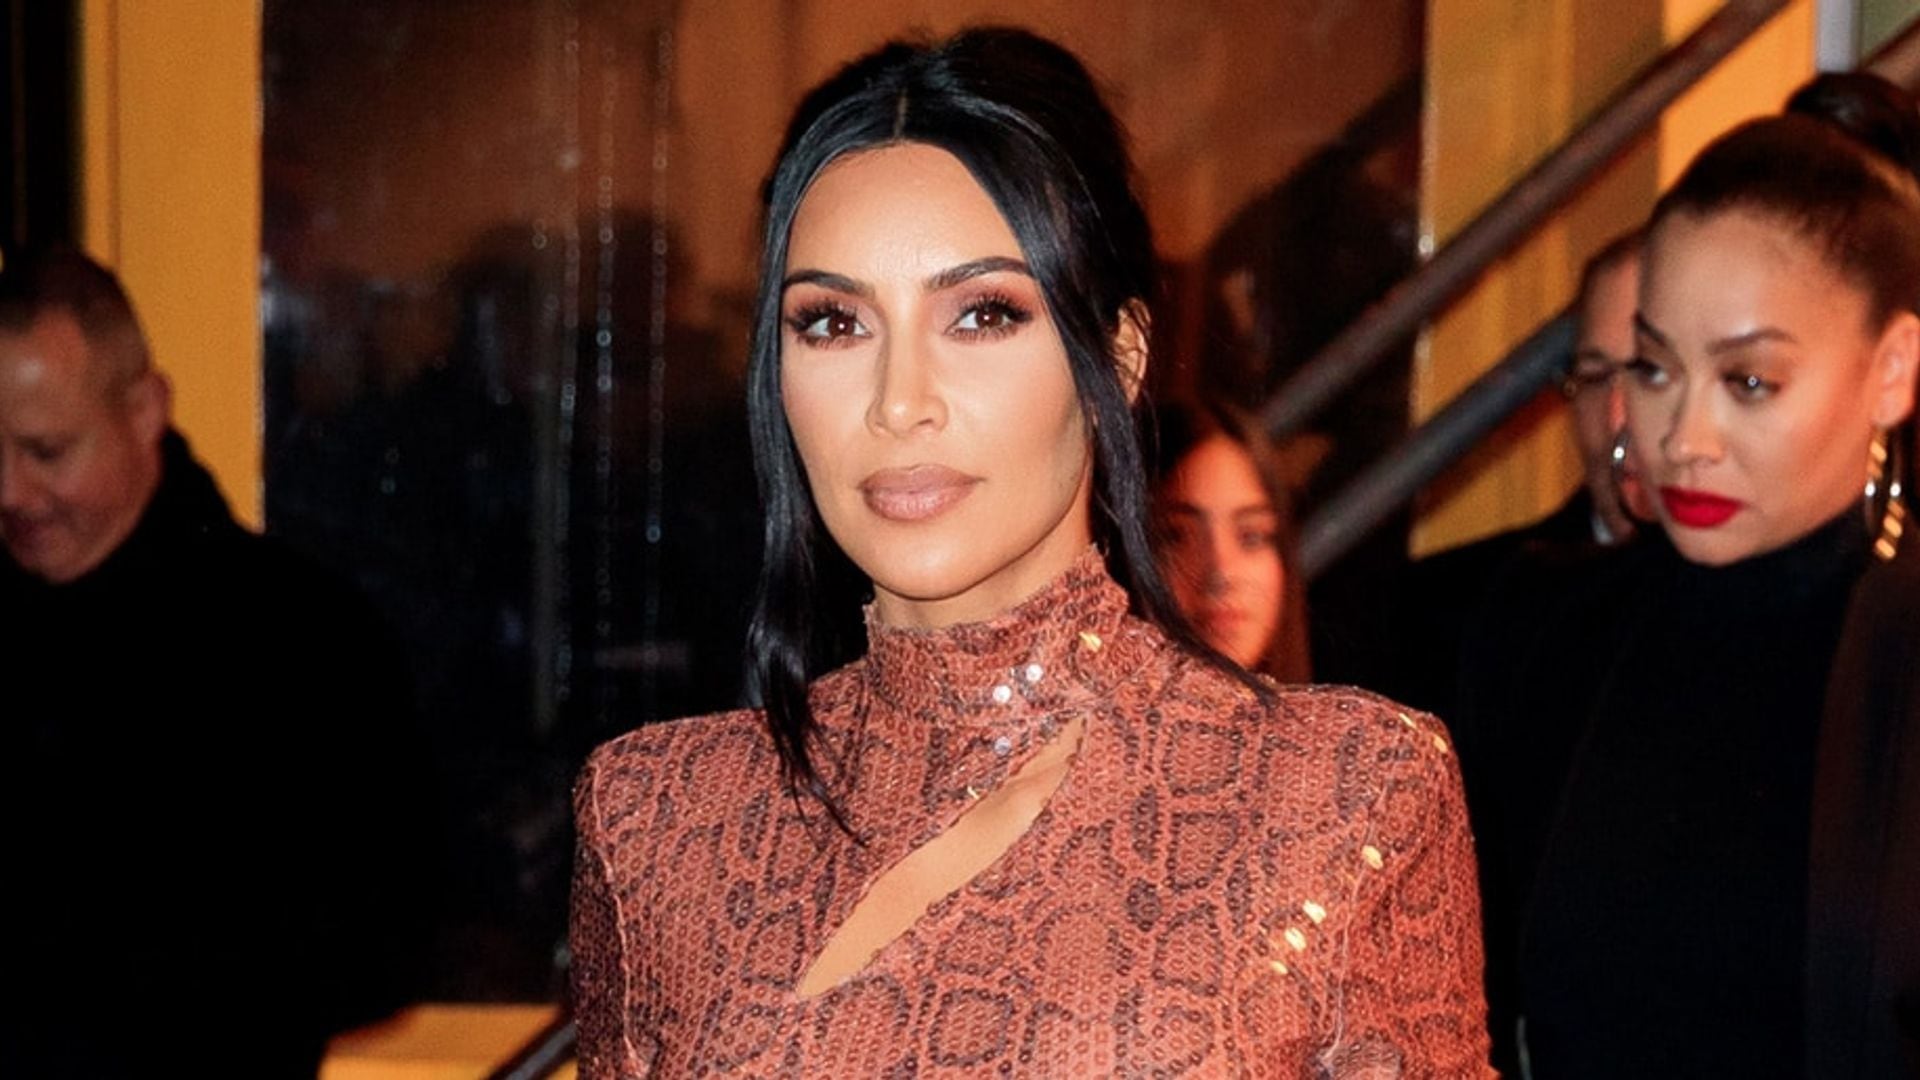 Kim Kardashian stuns in daring unitard as she celebrates opening of center named after her late father